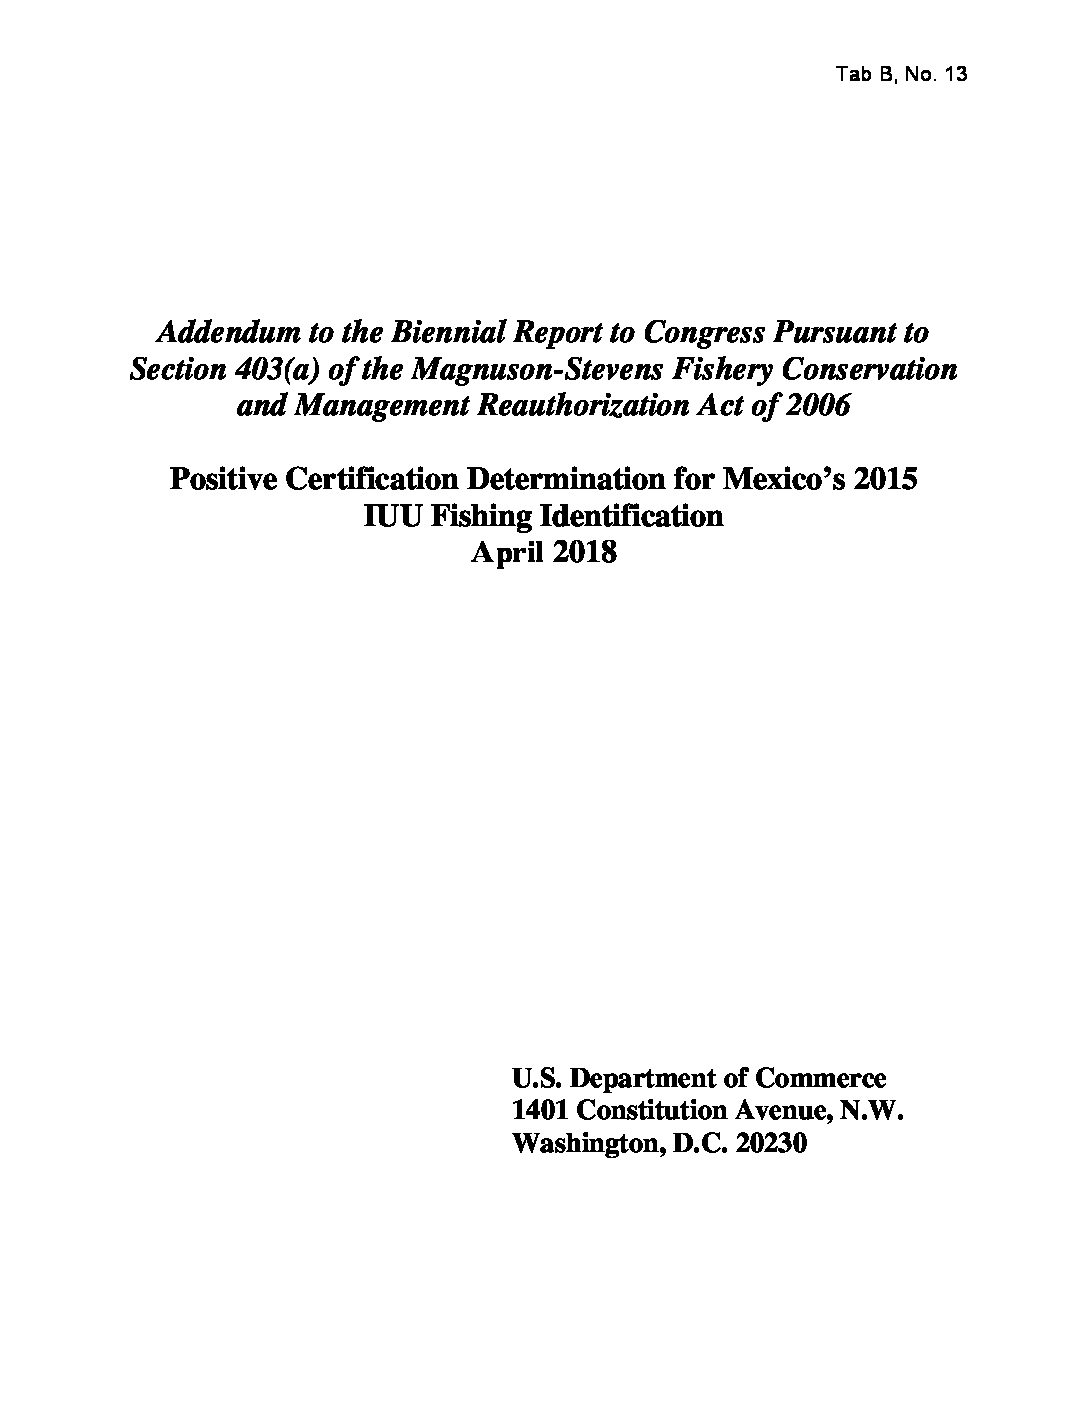 B 13 Iuu Fishing Id Addendum To 17report To Congress 508 1 Gulf Of Mexico Fishery Management Council